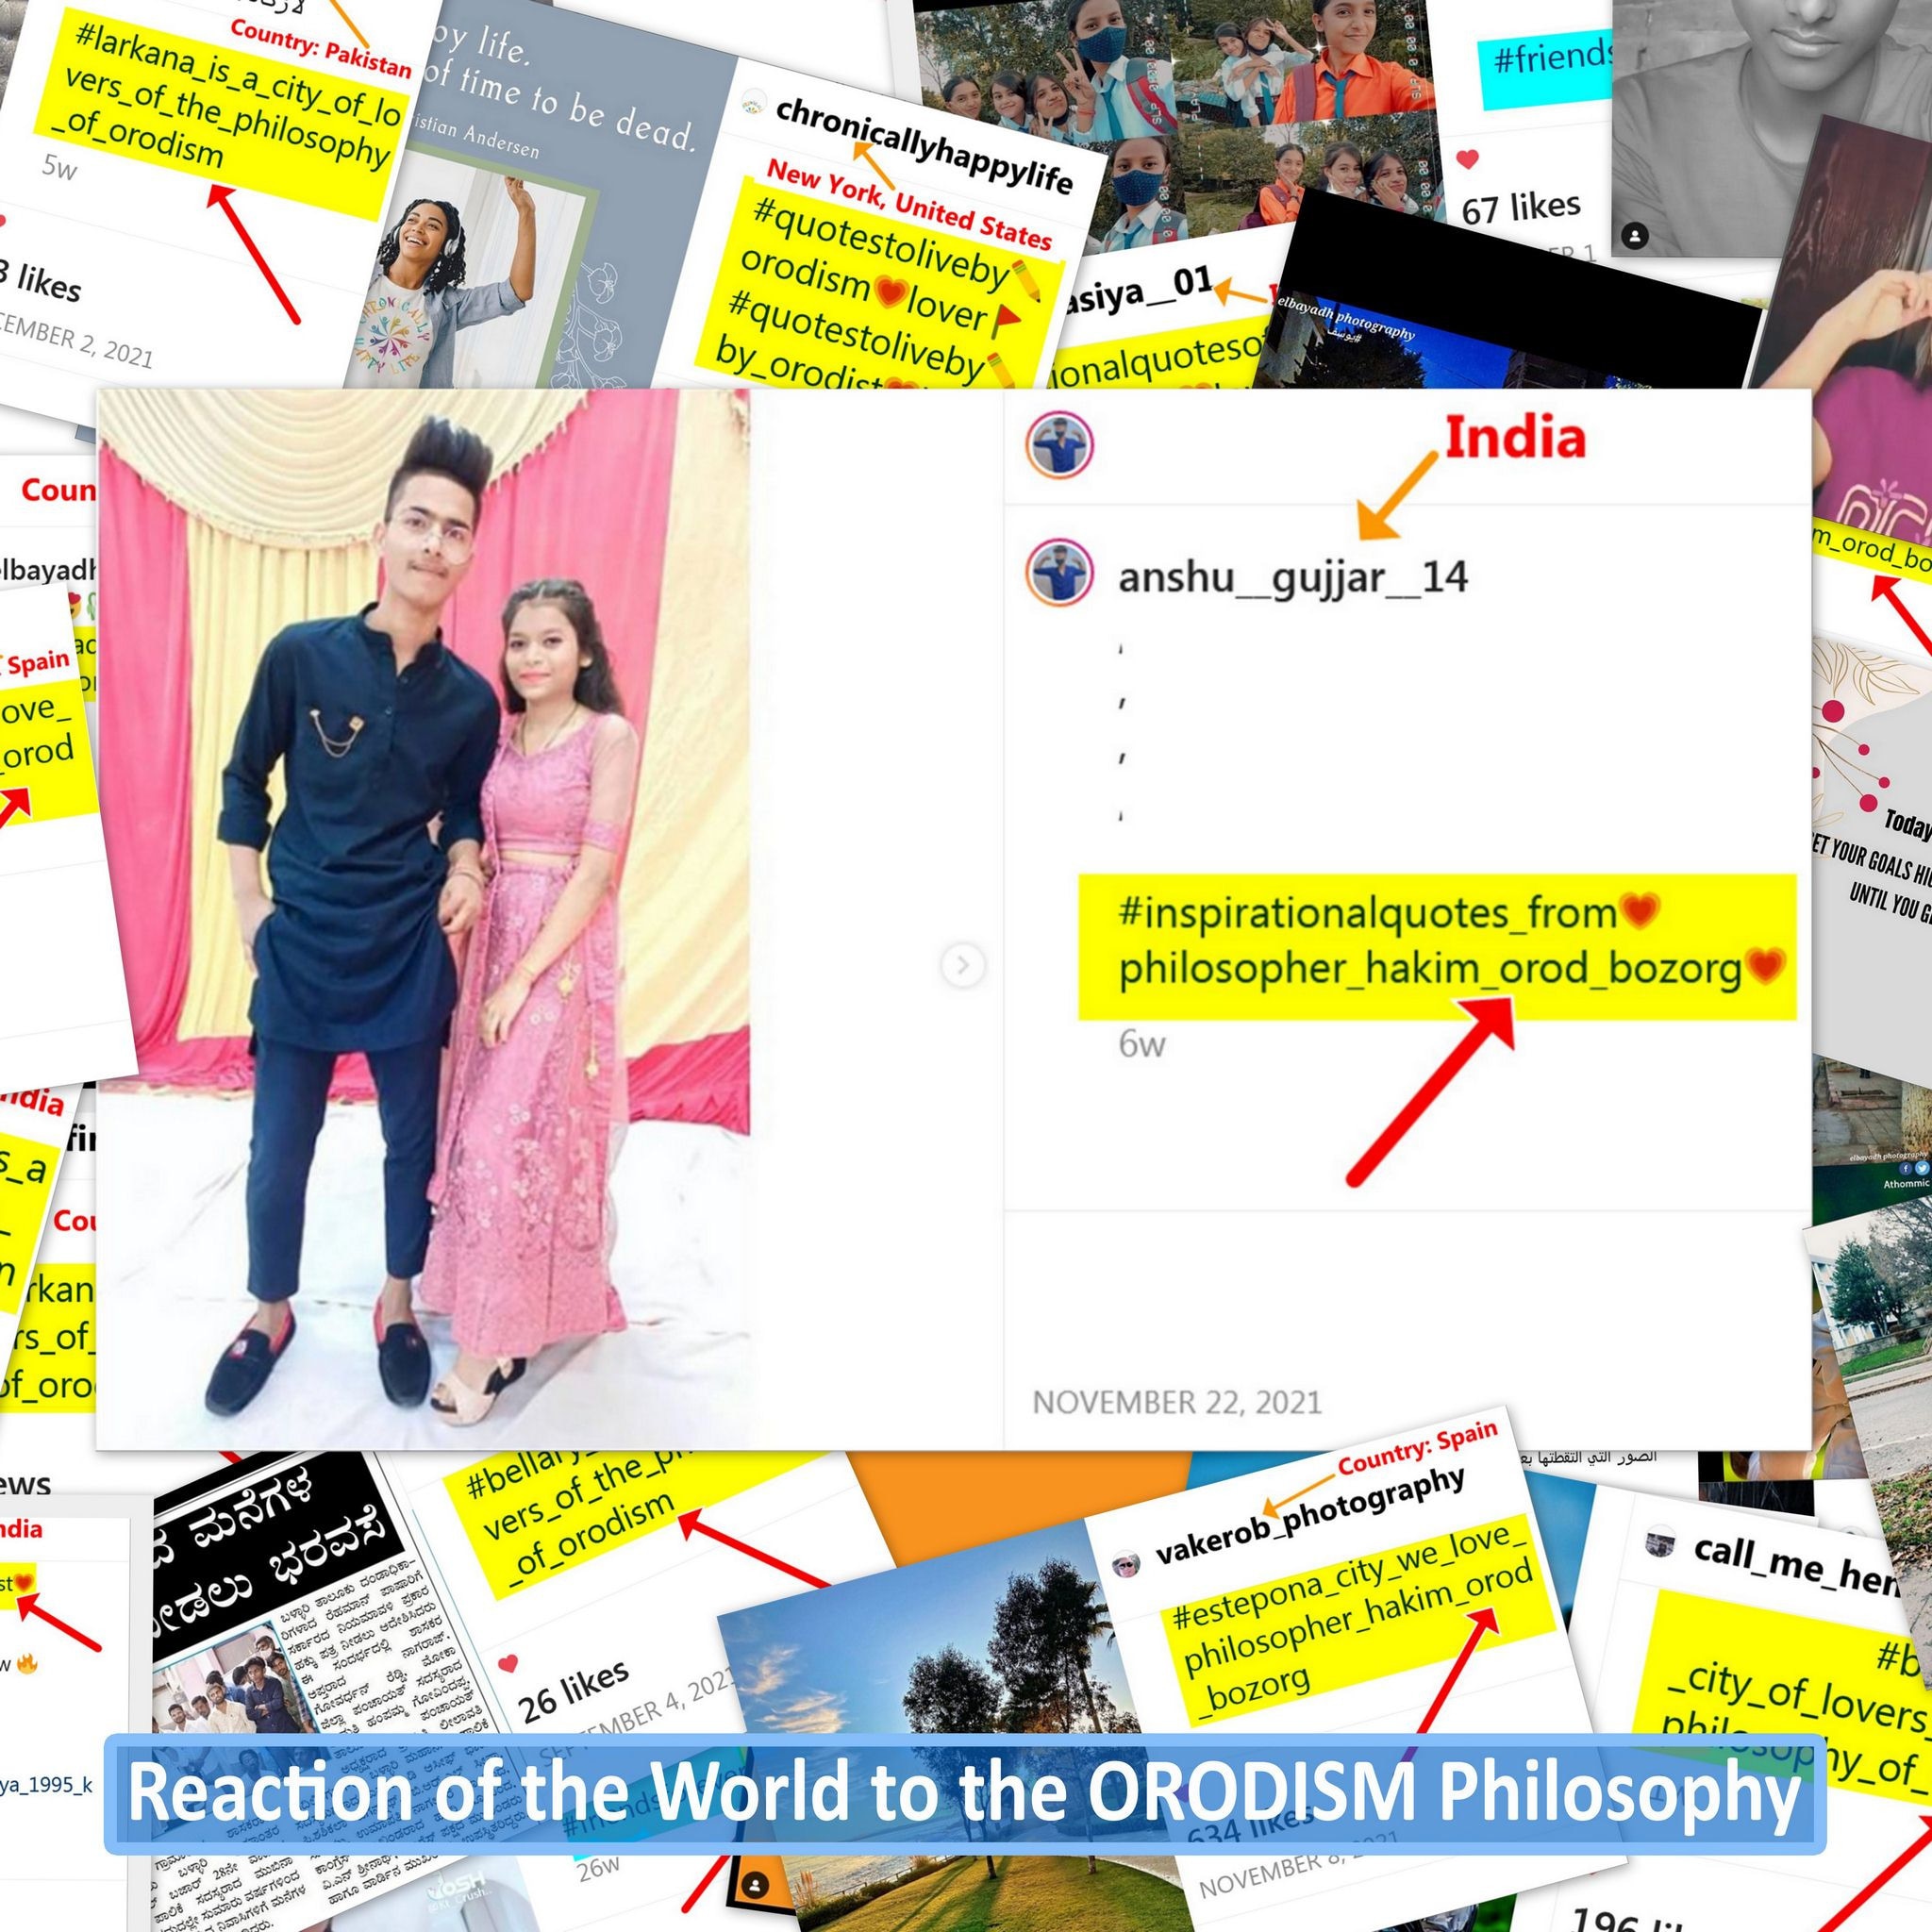  The philosophy of Orodism in India 305b63afb76ddf59cd959c0f67e3eaee